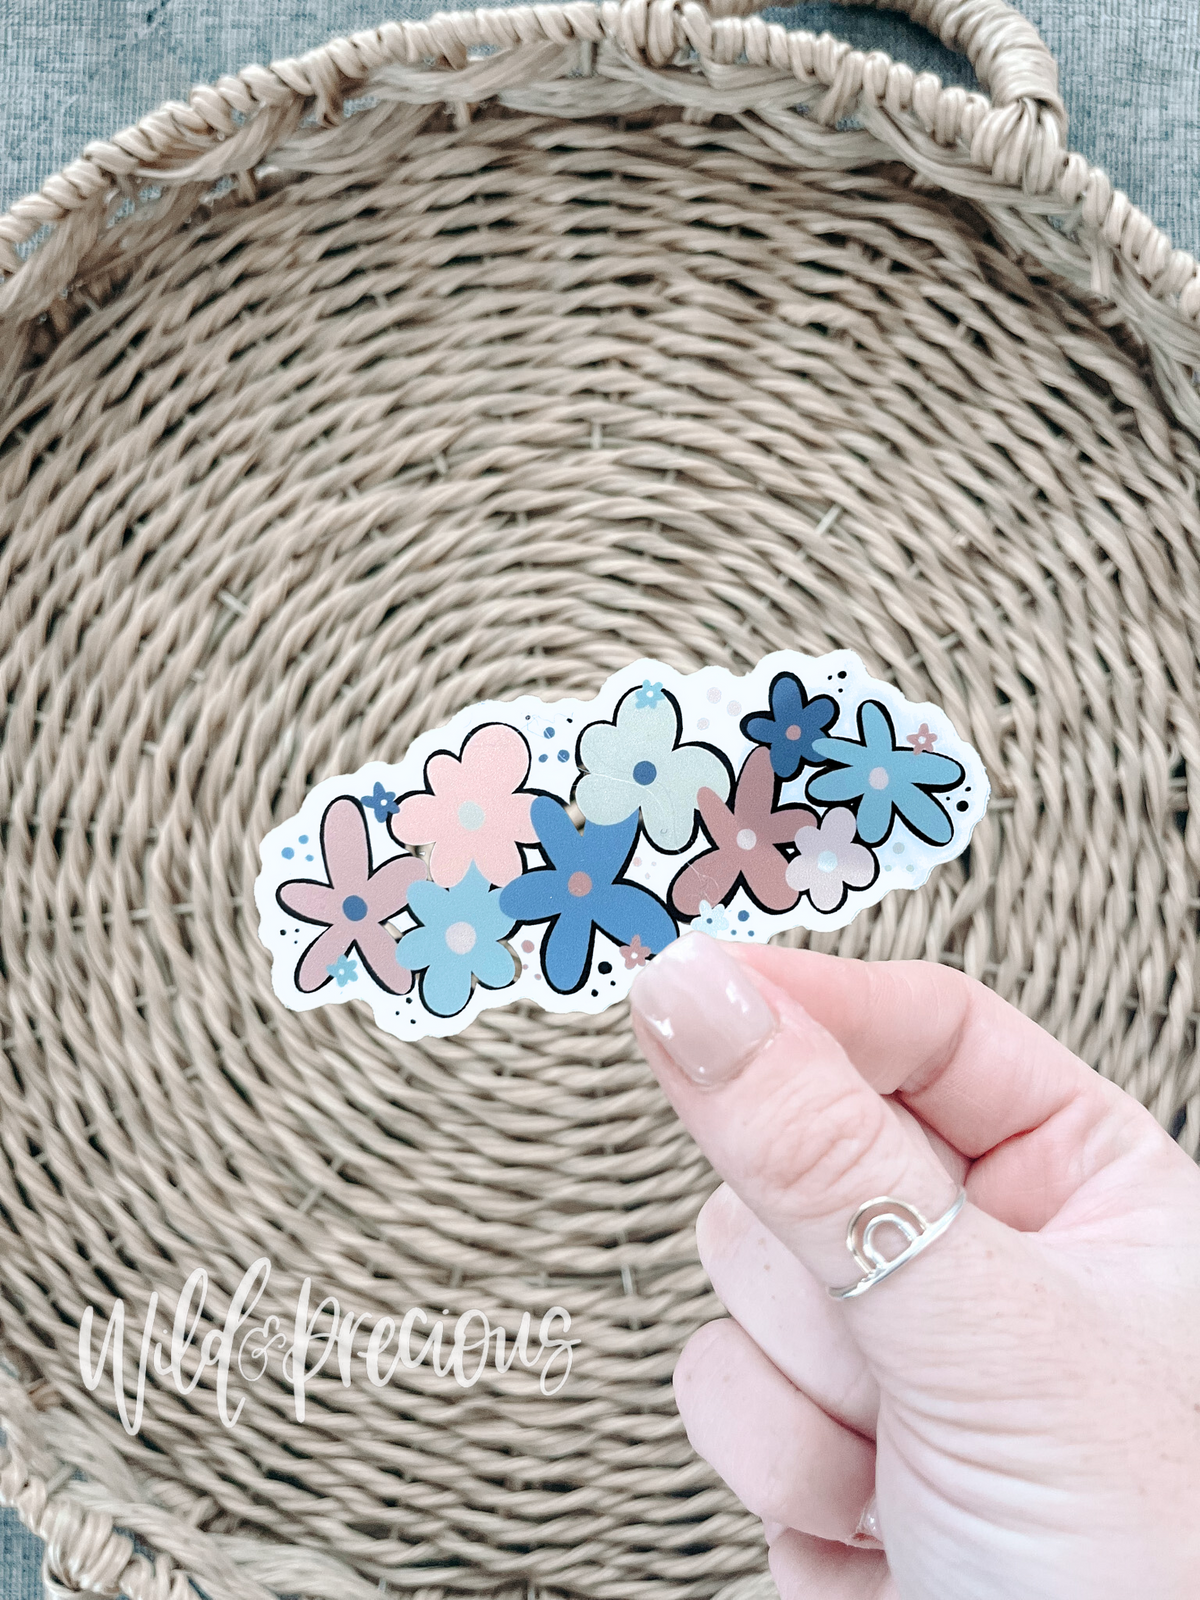 Colorful Flowers Sticker